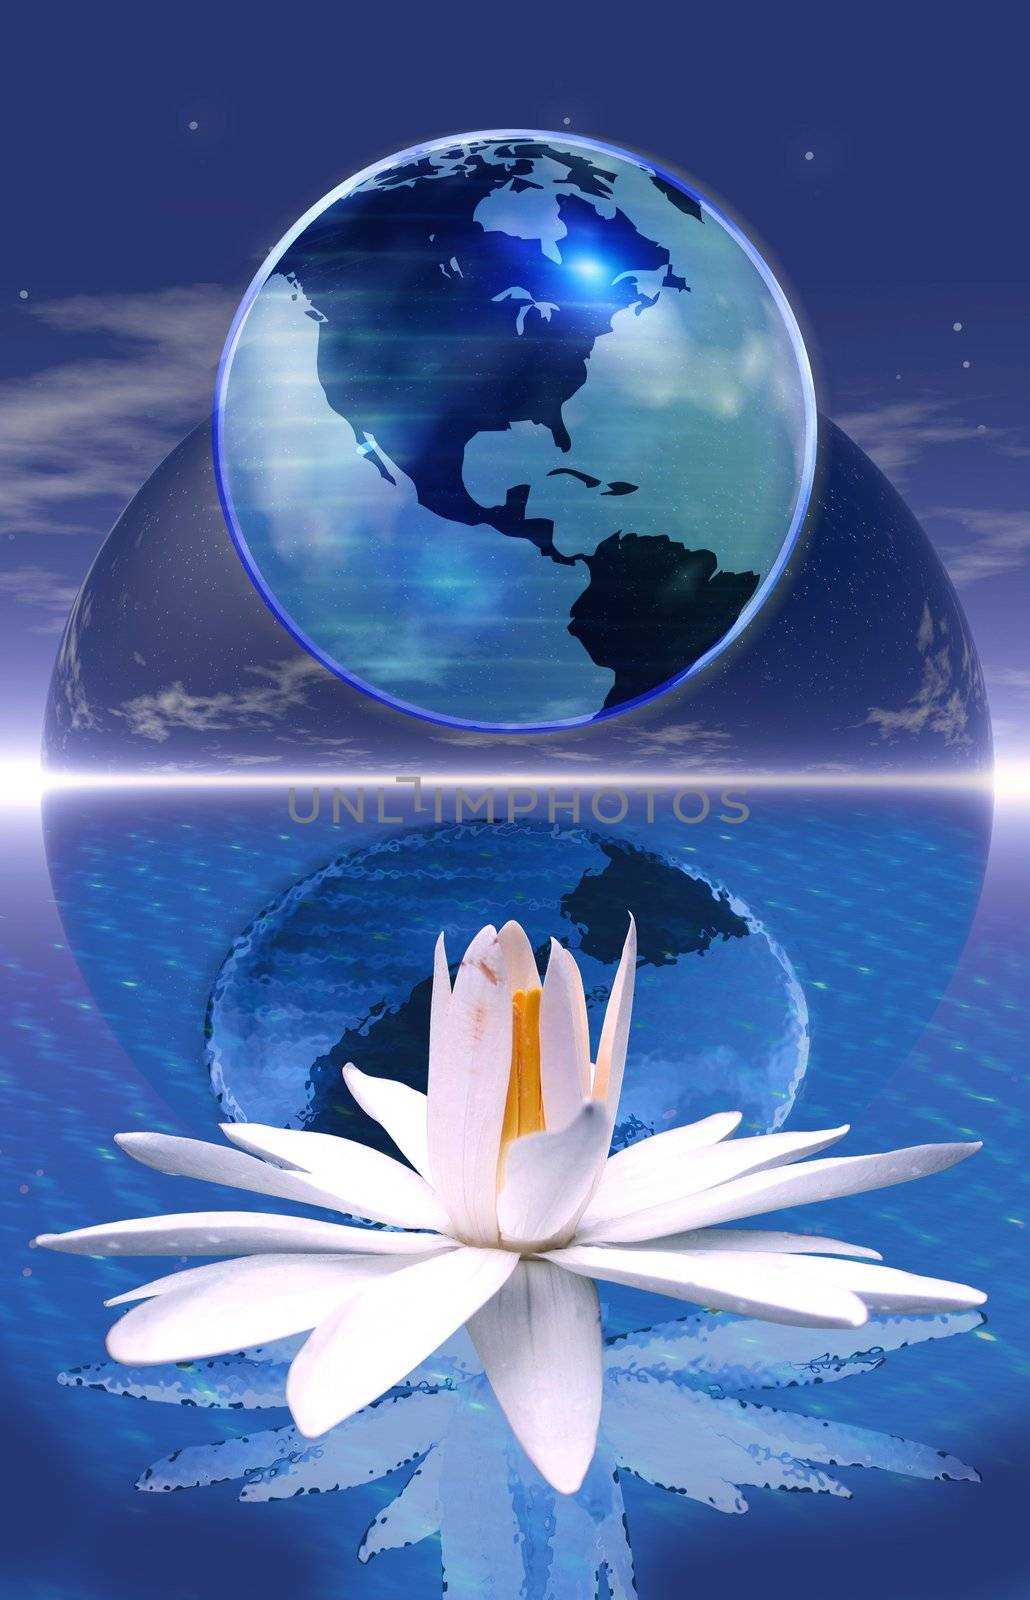 Earth globe and lotus flower - meditation concept by rgbspace